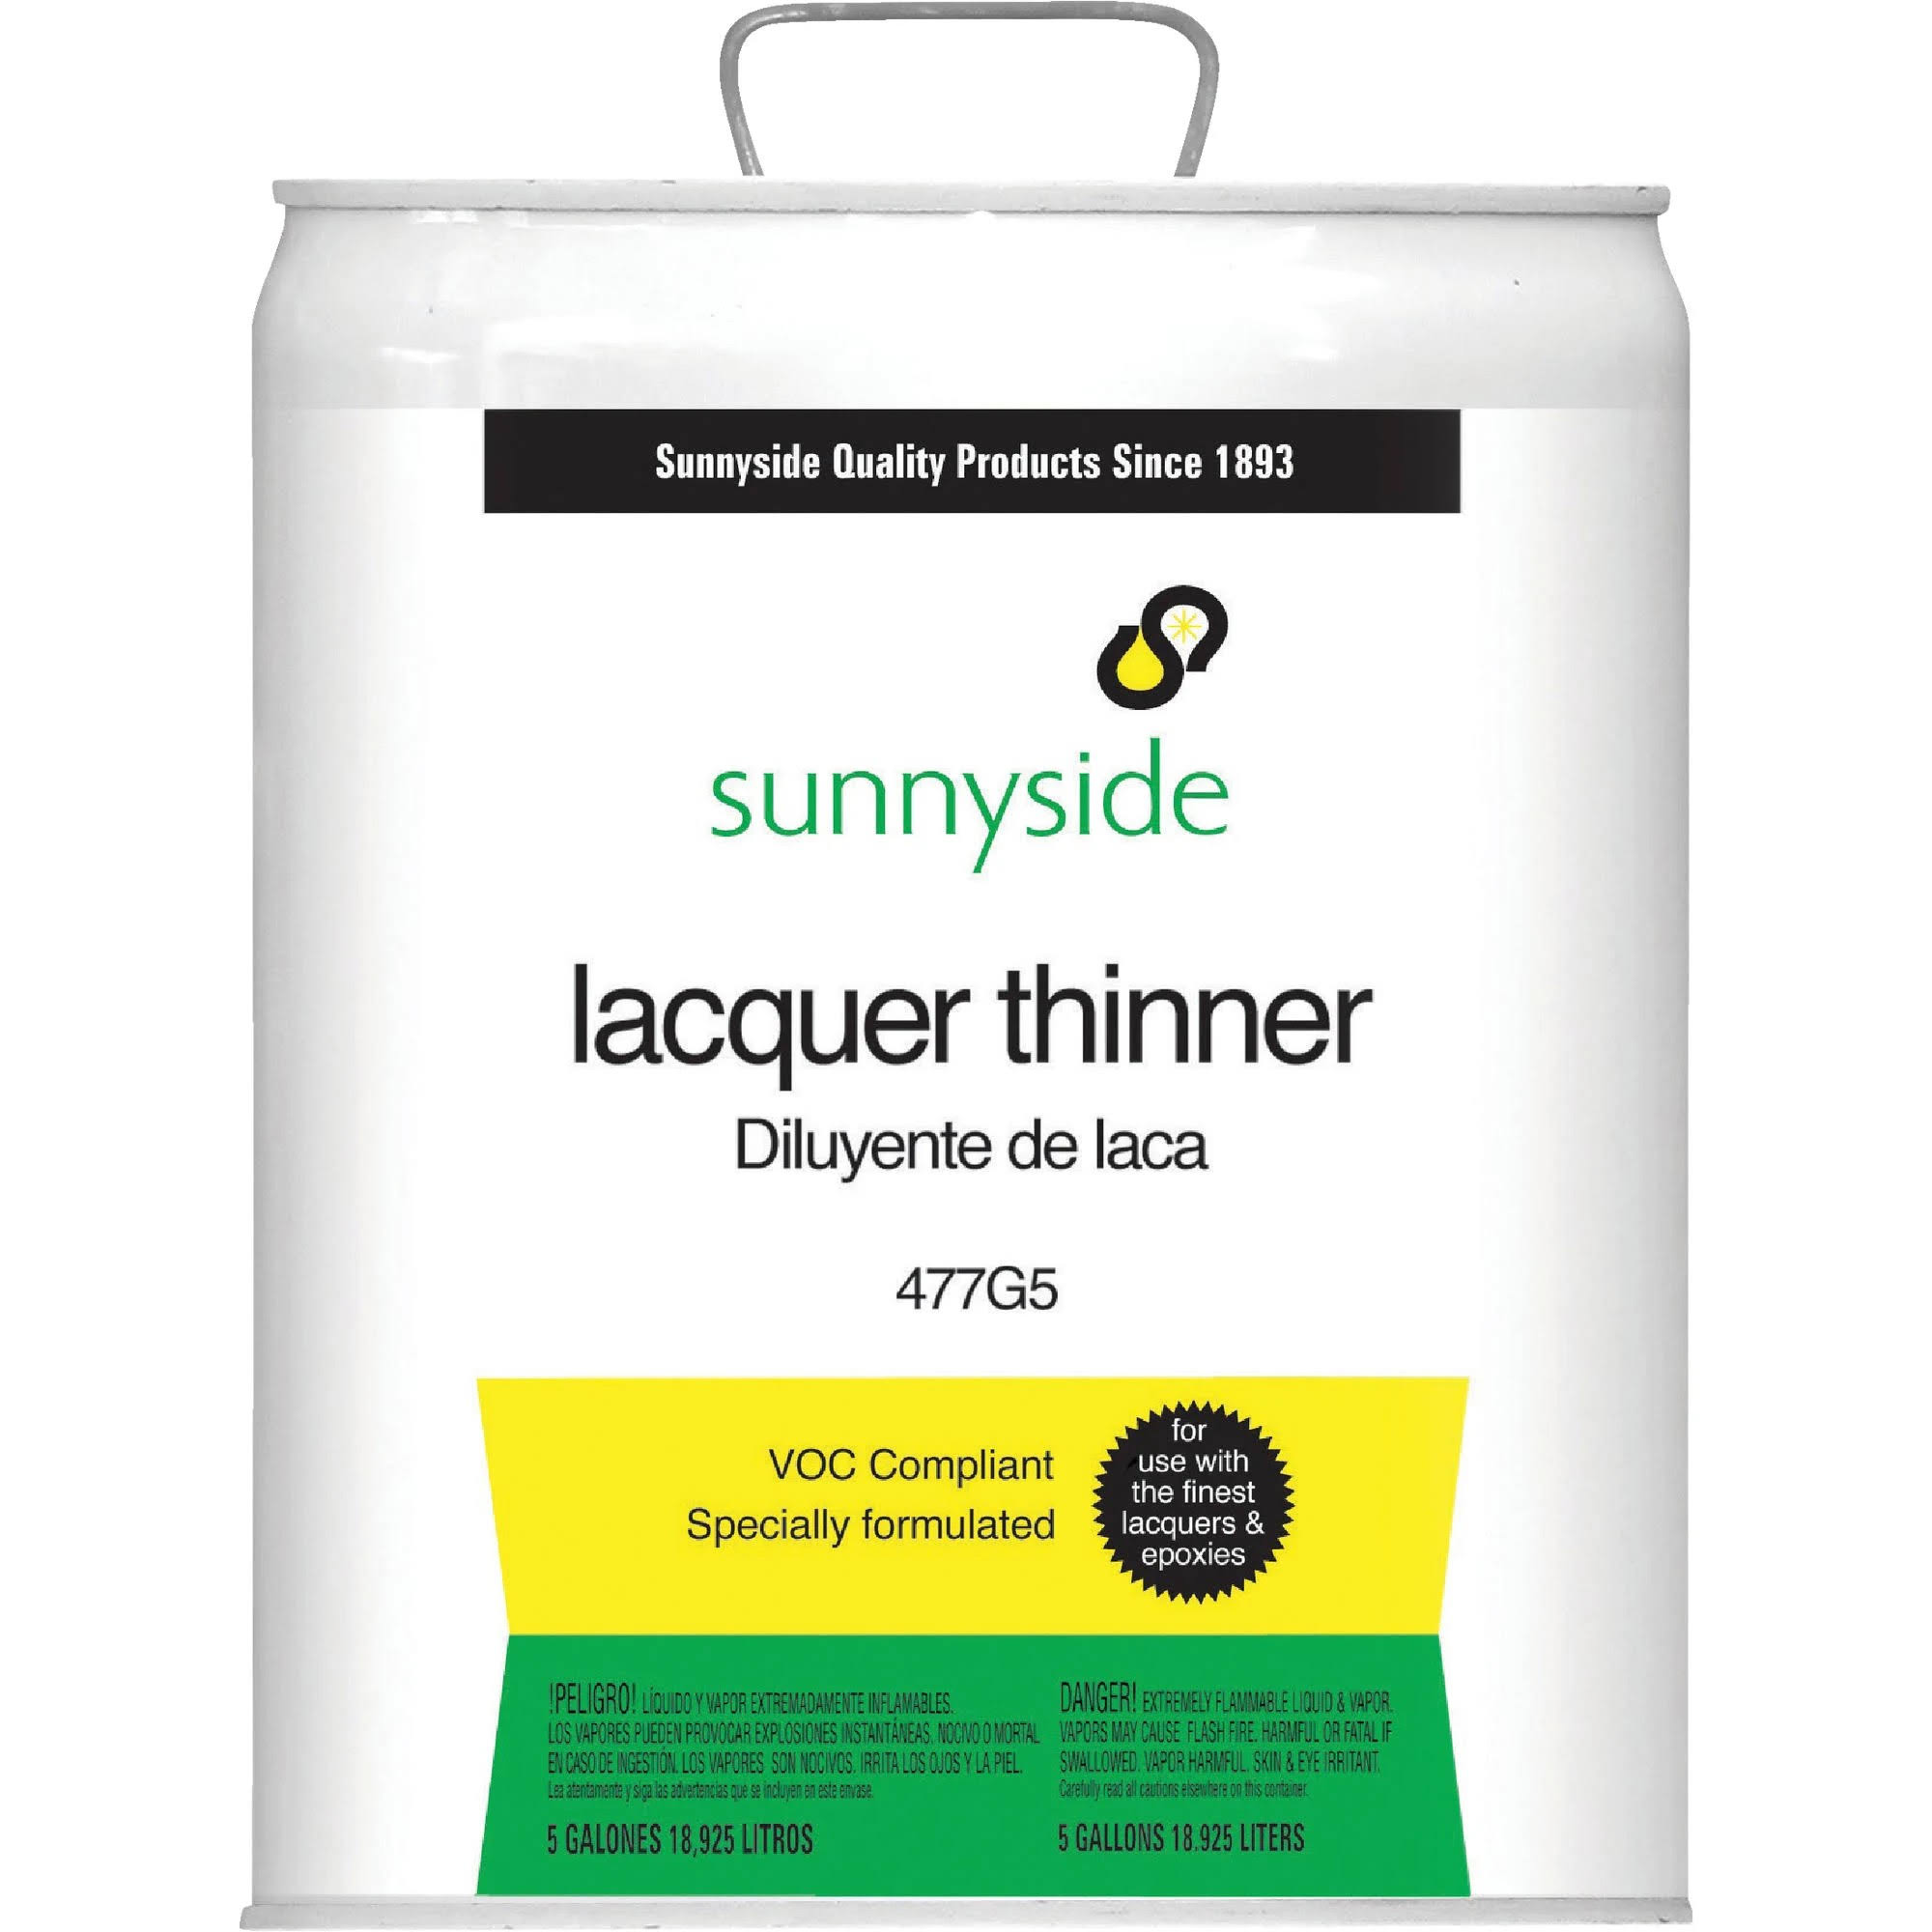 Sunnyside Lacquer Thinner 5-Gallons 477G5